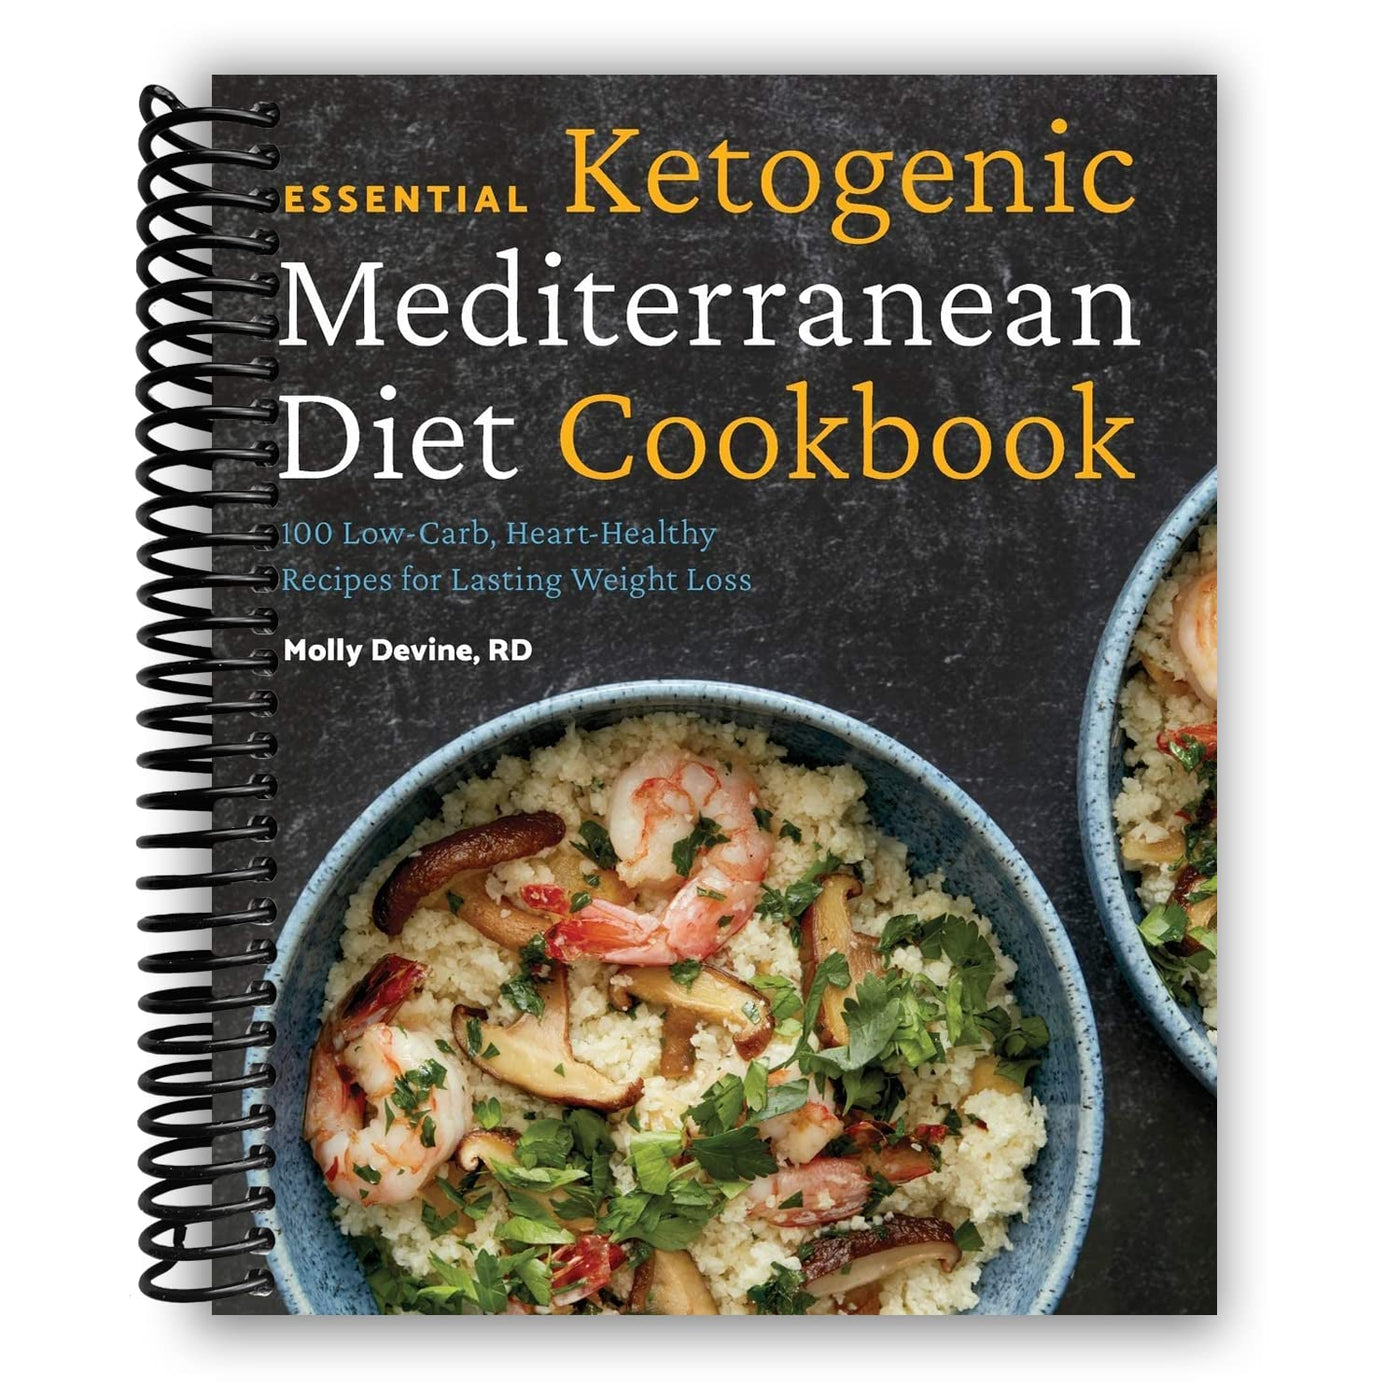 Essential Ketogenic Mediterranean Diet Cookbook: 100 Low-Carb, Heart-Healthy Recipes for Lasting Weight Loss(Spiral Bound)